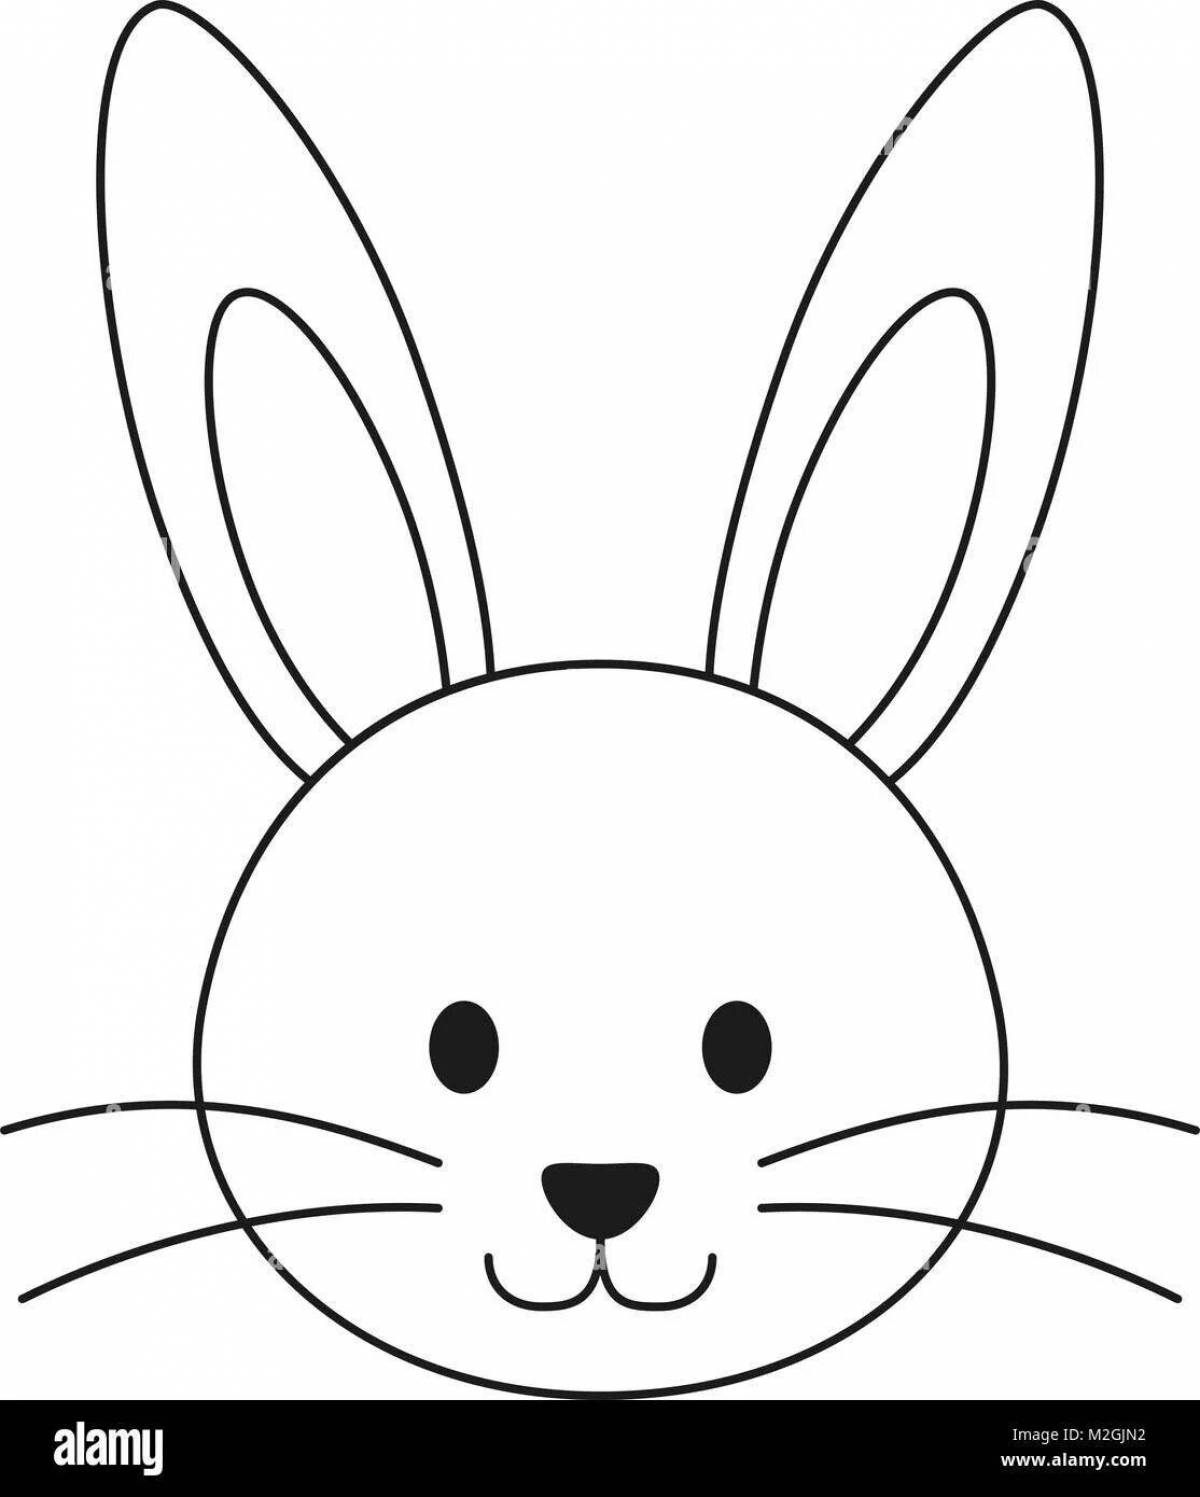 Adorable hare head coloring page